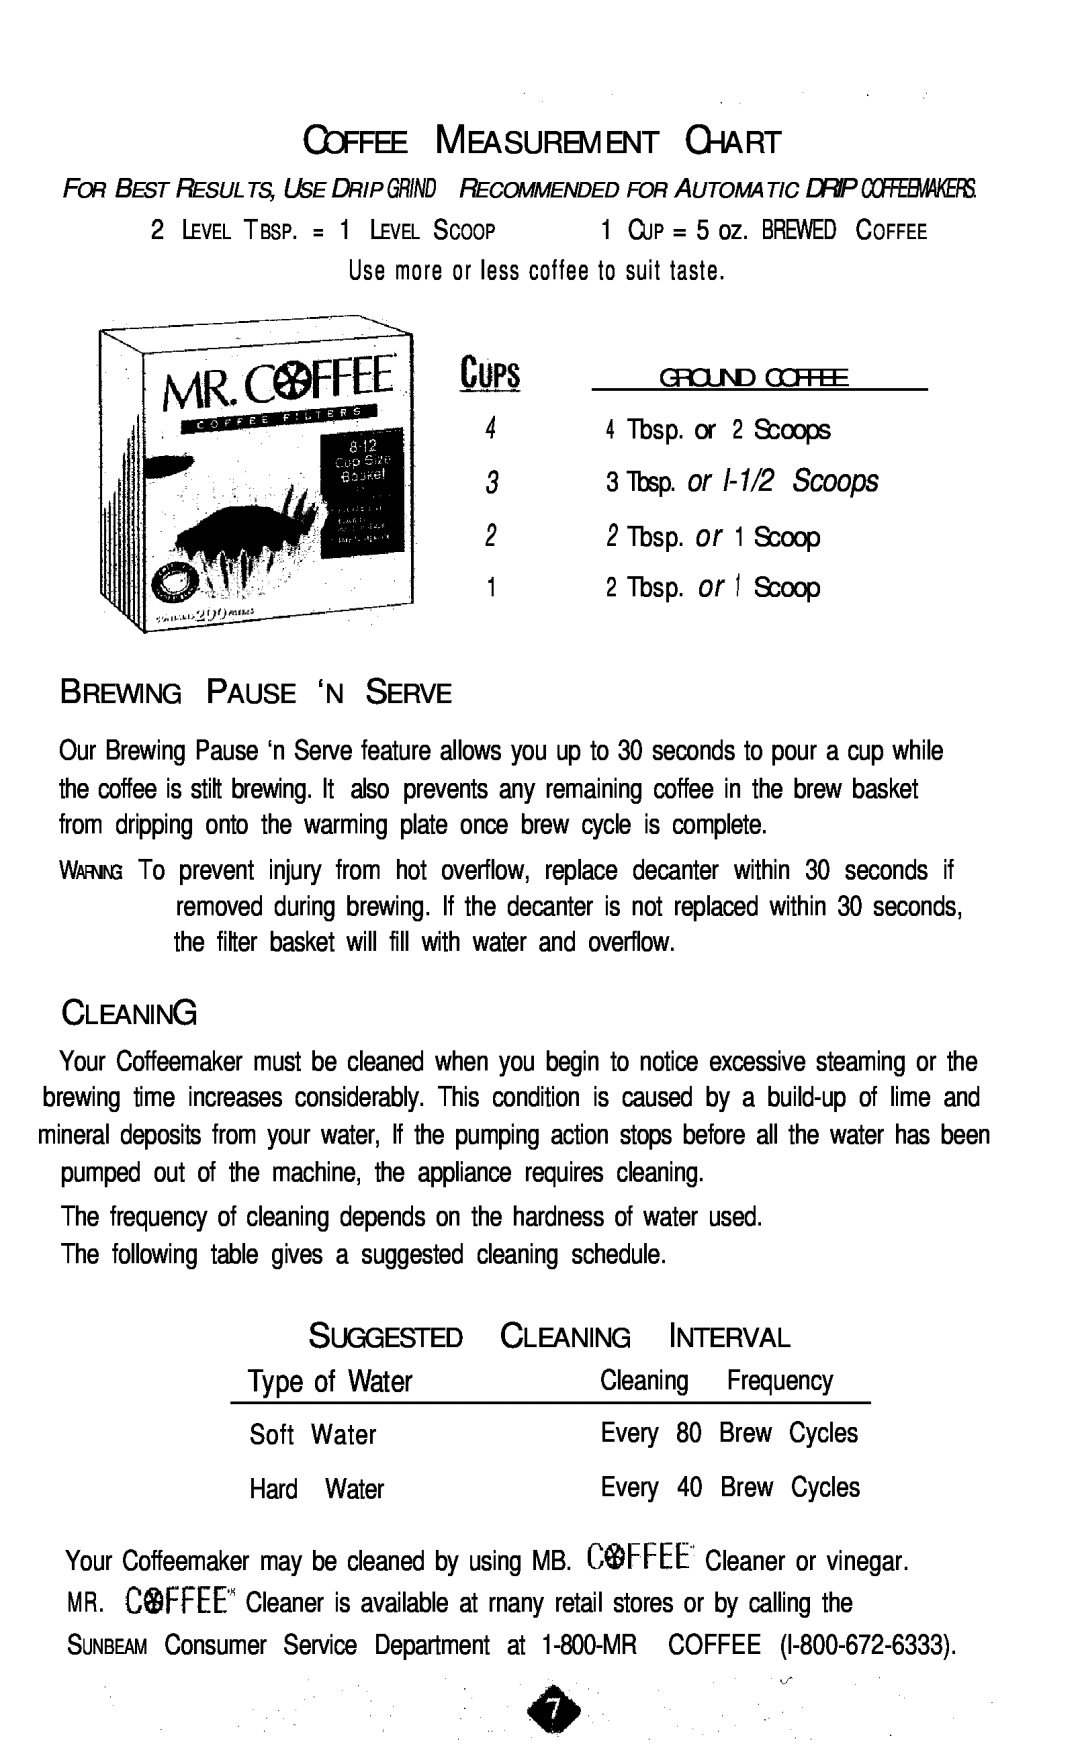 Mr. Coffee NL4 White Coffee Measurement Chart, TypeofWater, Soft, cups, Tbsp. or 2 Scoops, 3 3 Tbsp. or l-1/2Scoops, Brew 